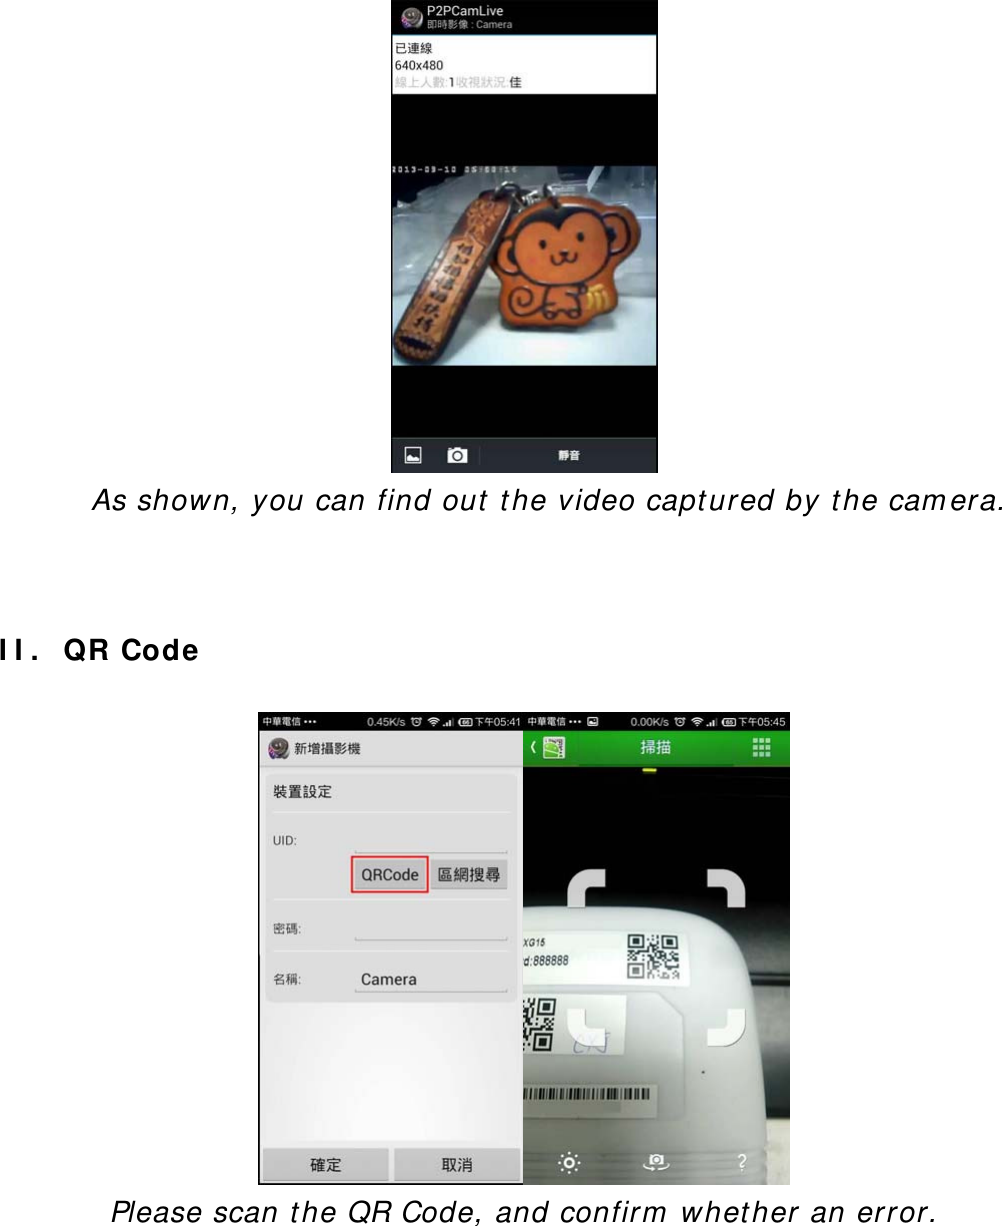  As shown, you can find out the video captured by the camera.    II.   QR Code   Please scan the QR Code, and confirm whether an error.   